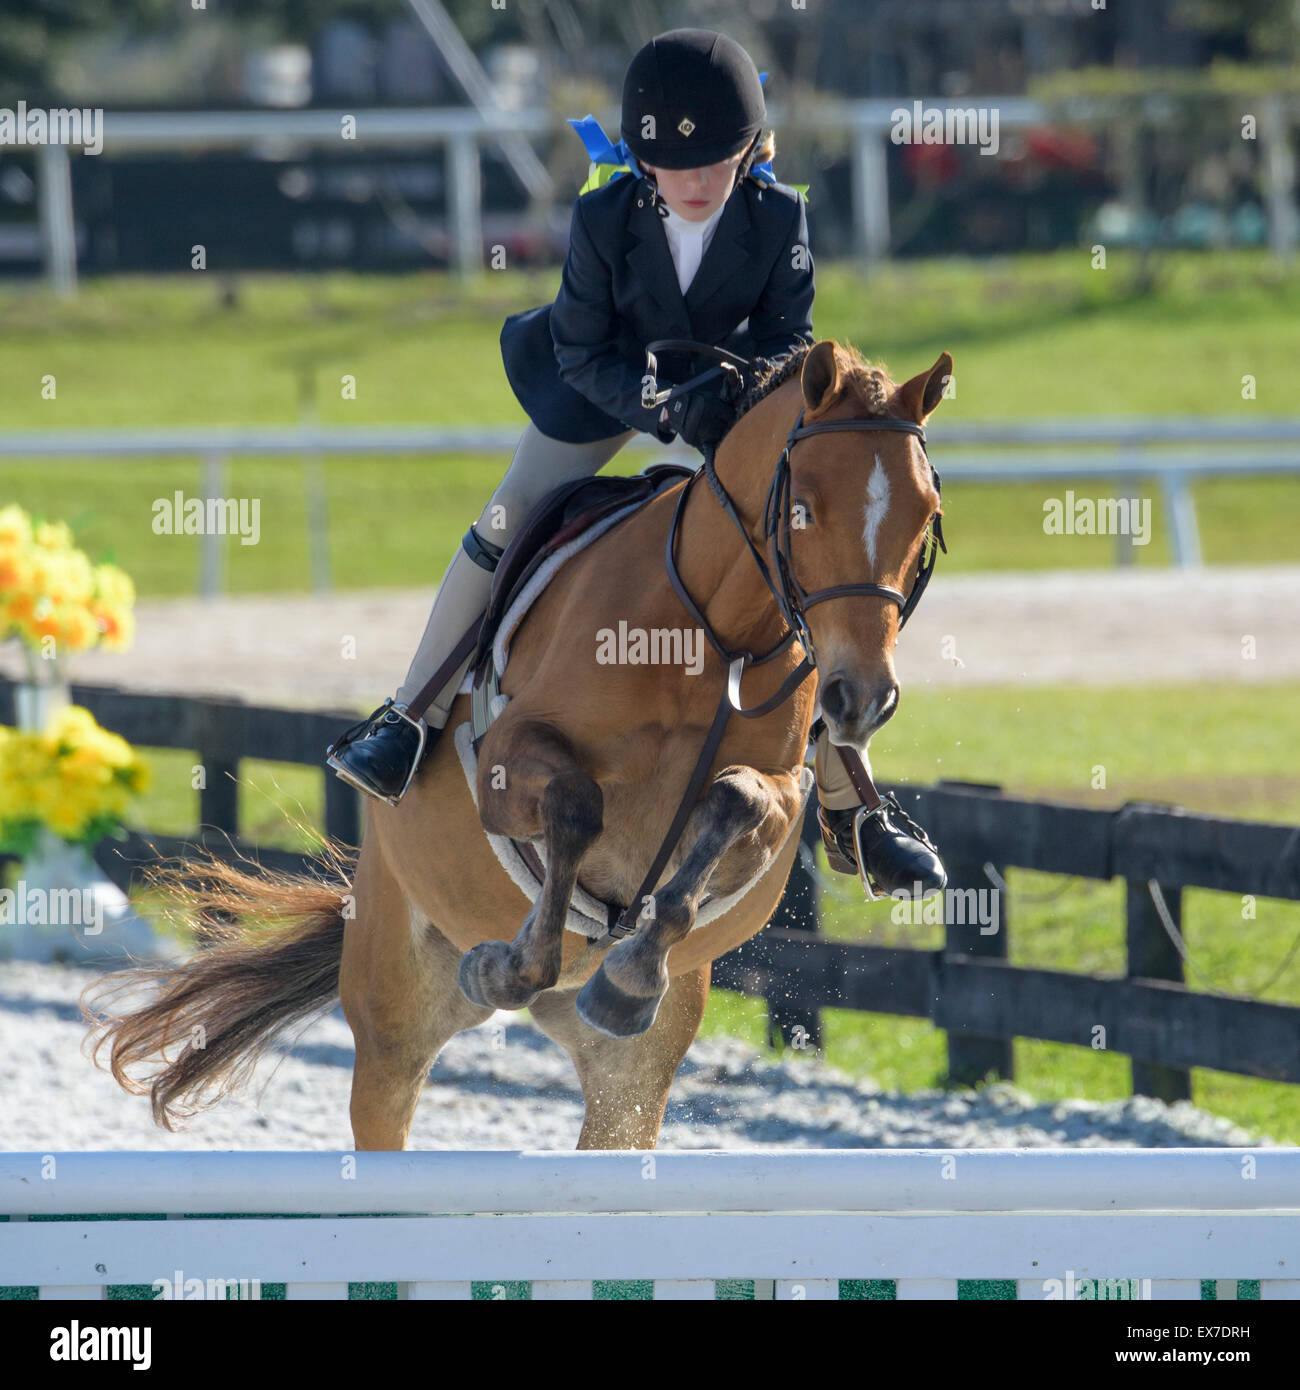 Female youth rider in show jumping competition Stock Photo